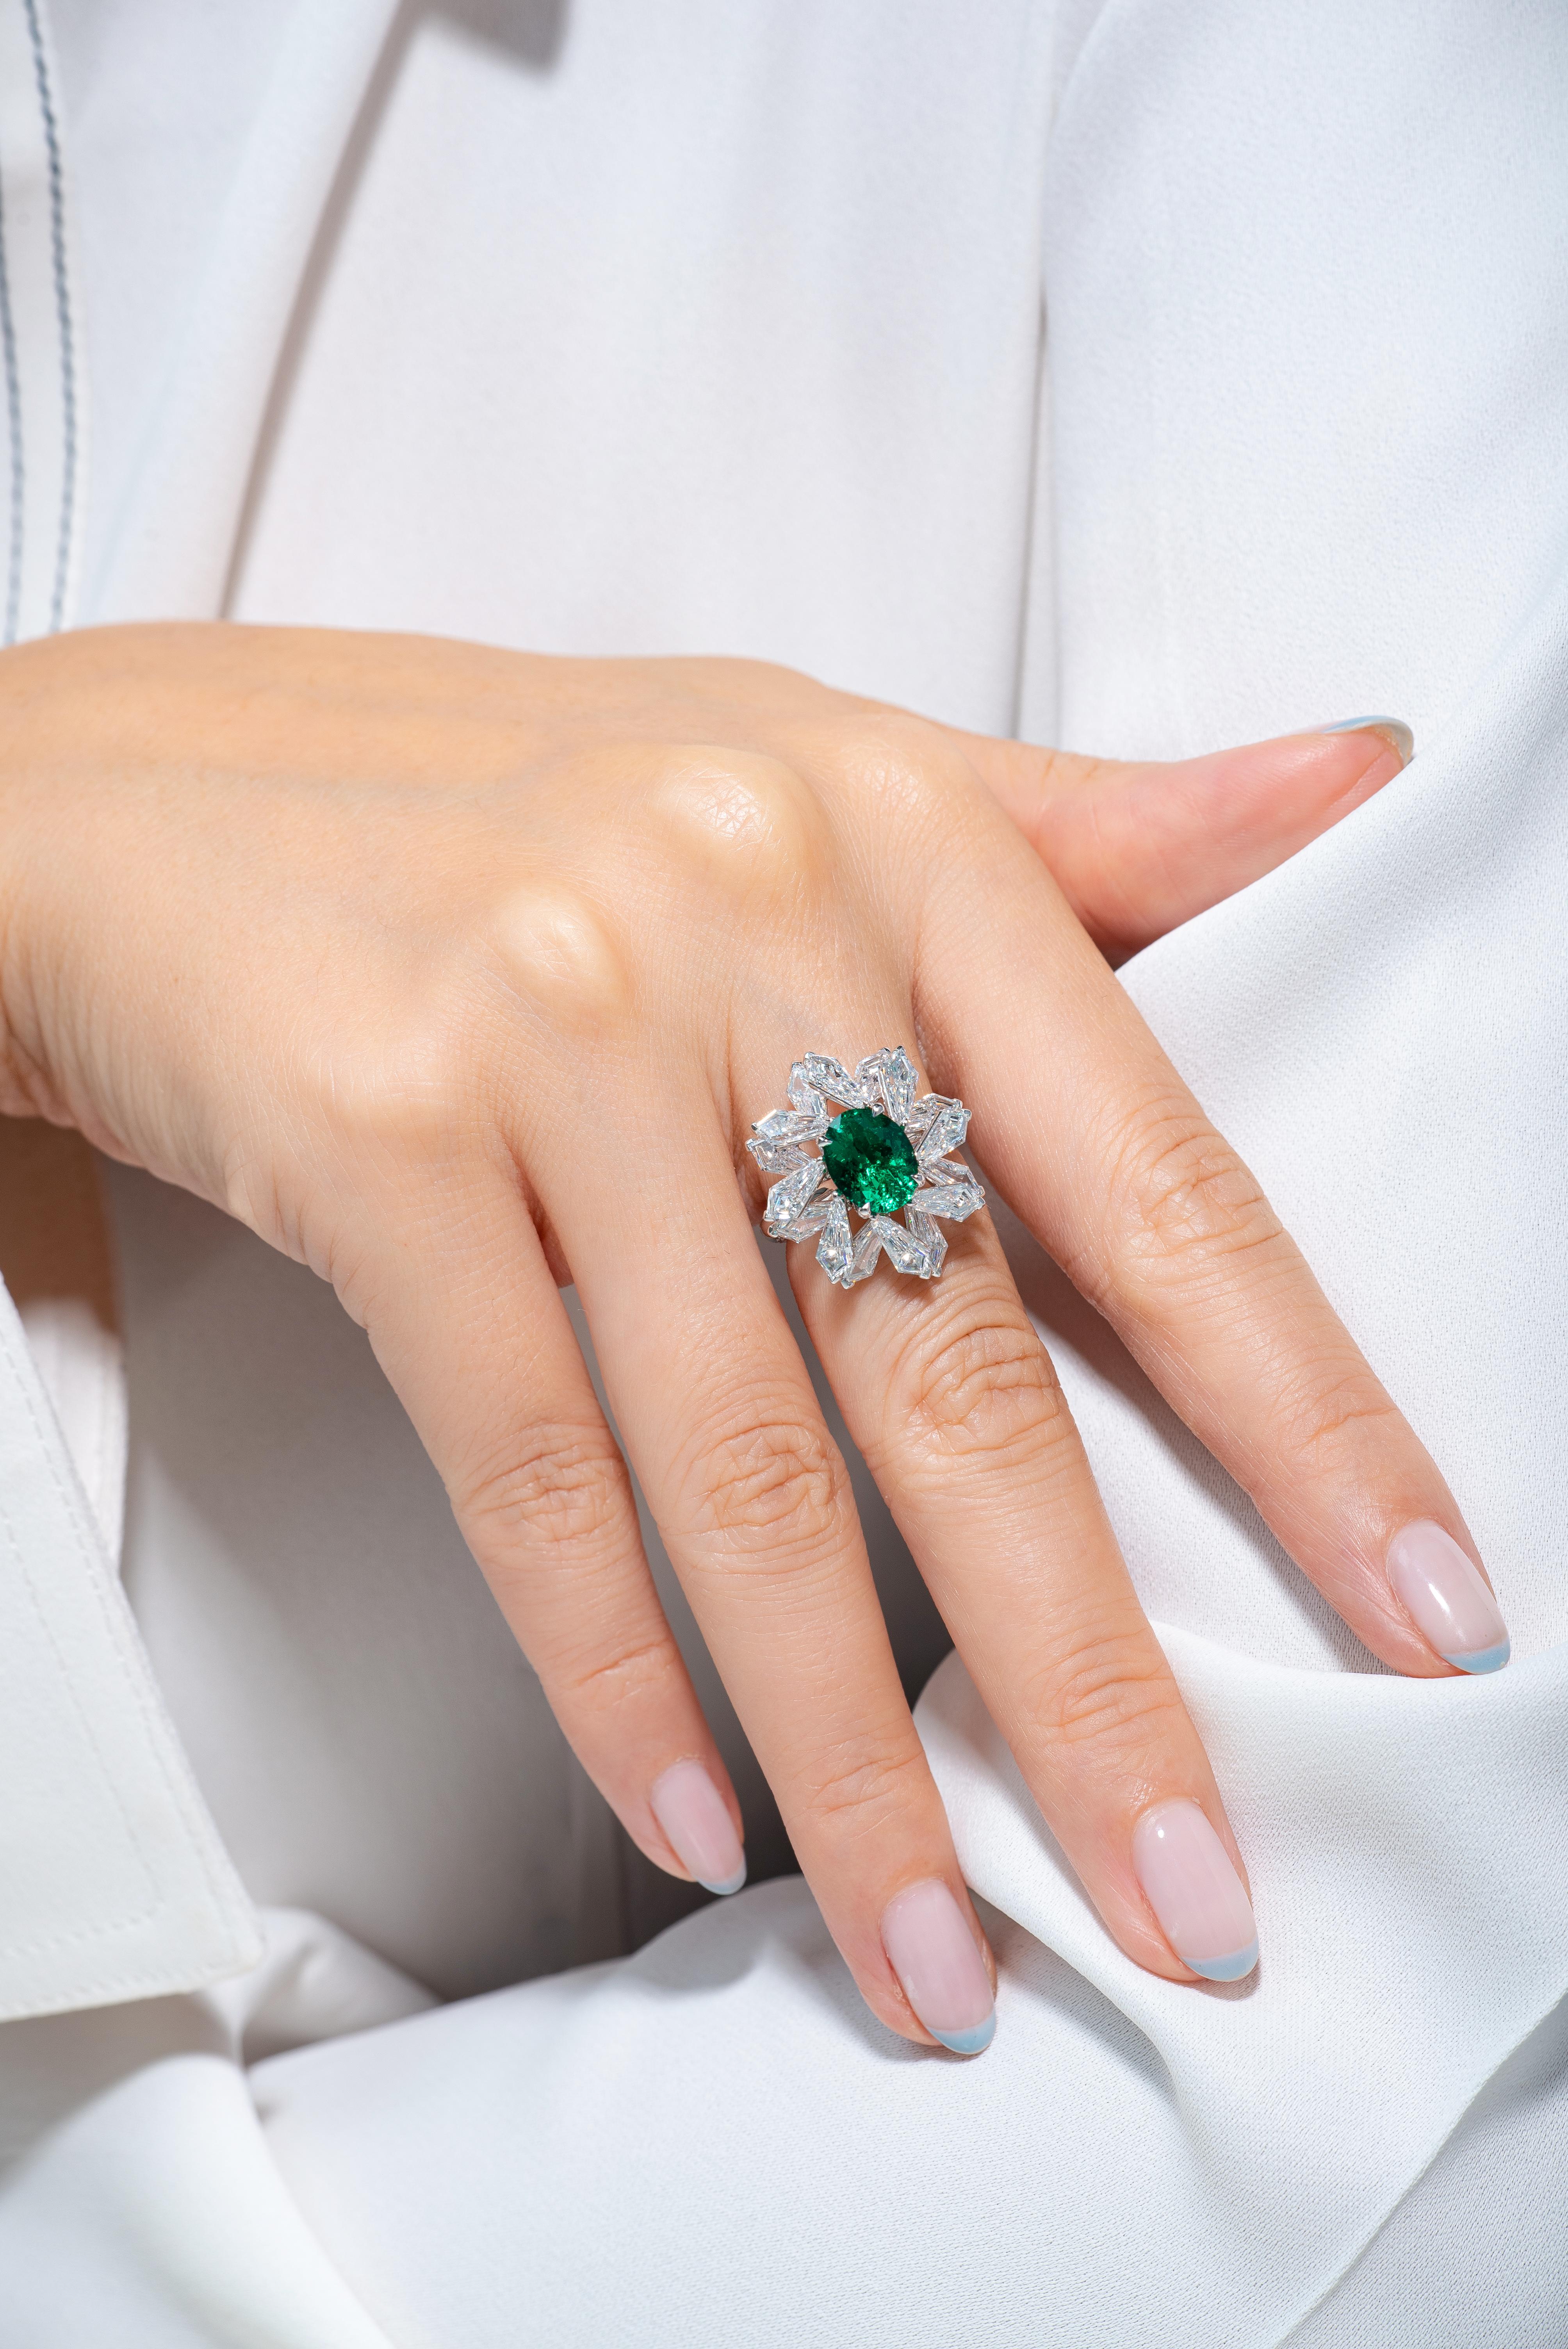 A diamond snowflake ring comprised of 4.62 carats of specialty kite shaped diamonds (D-F color, VS+ clarity). These kite shaped diamonds have been hand cut to surround the oval shaped 2.08 carats Colombian emerald gemstone perfectly. The gemstone is